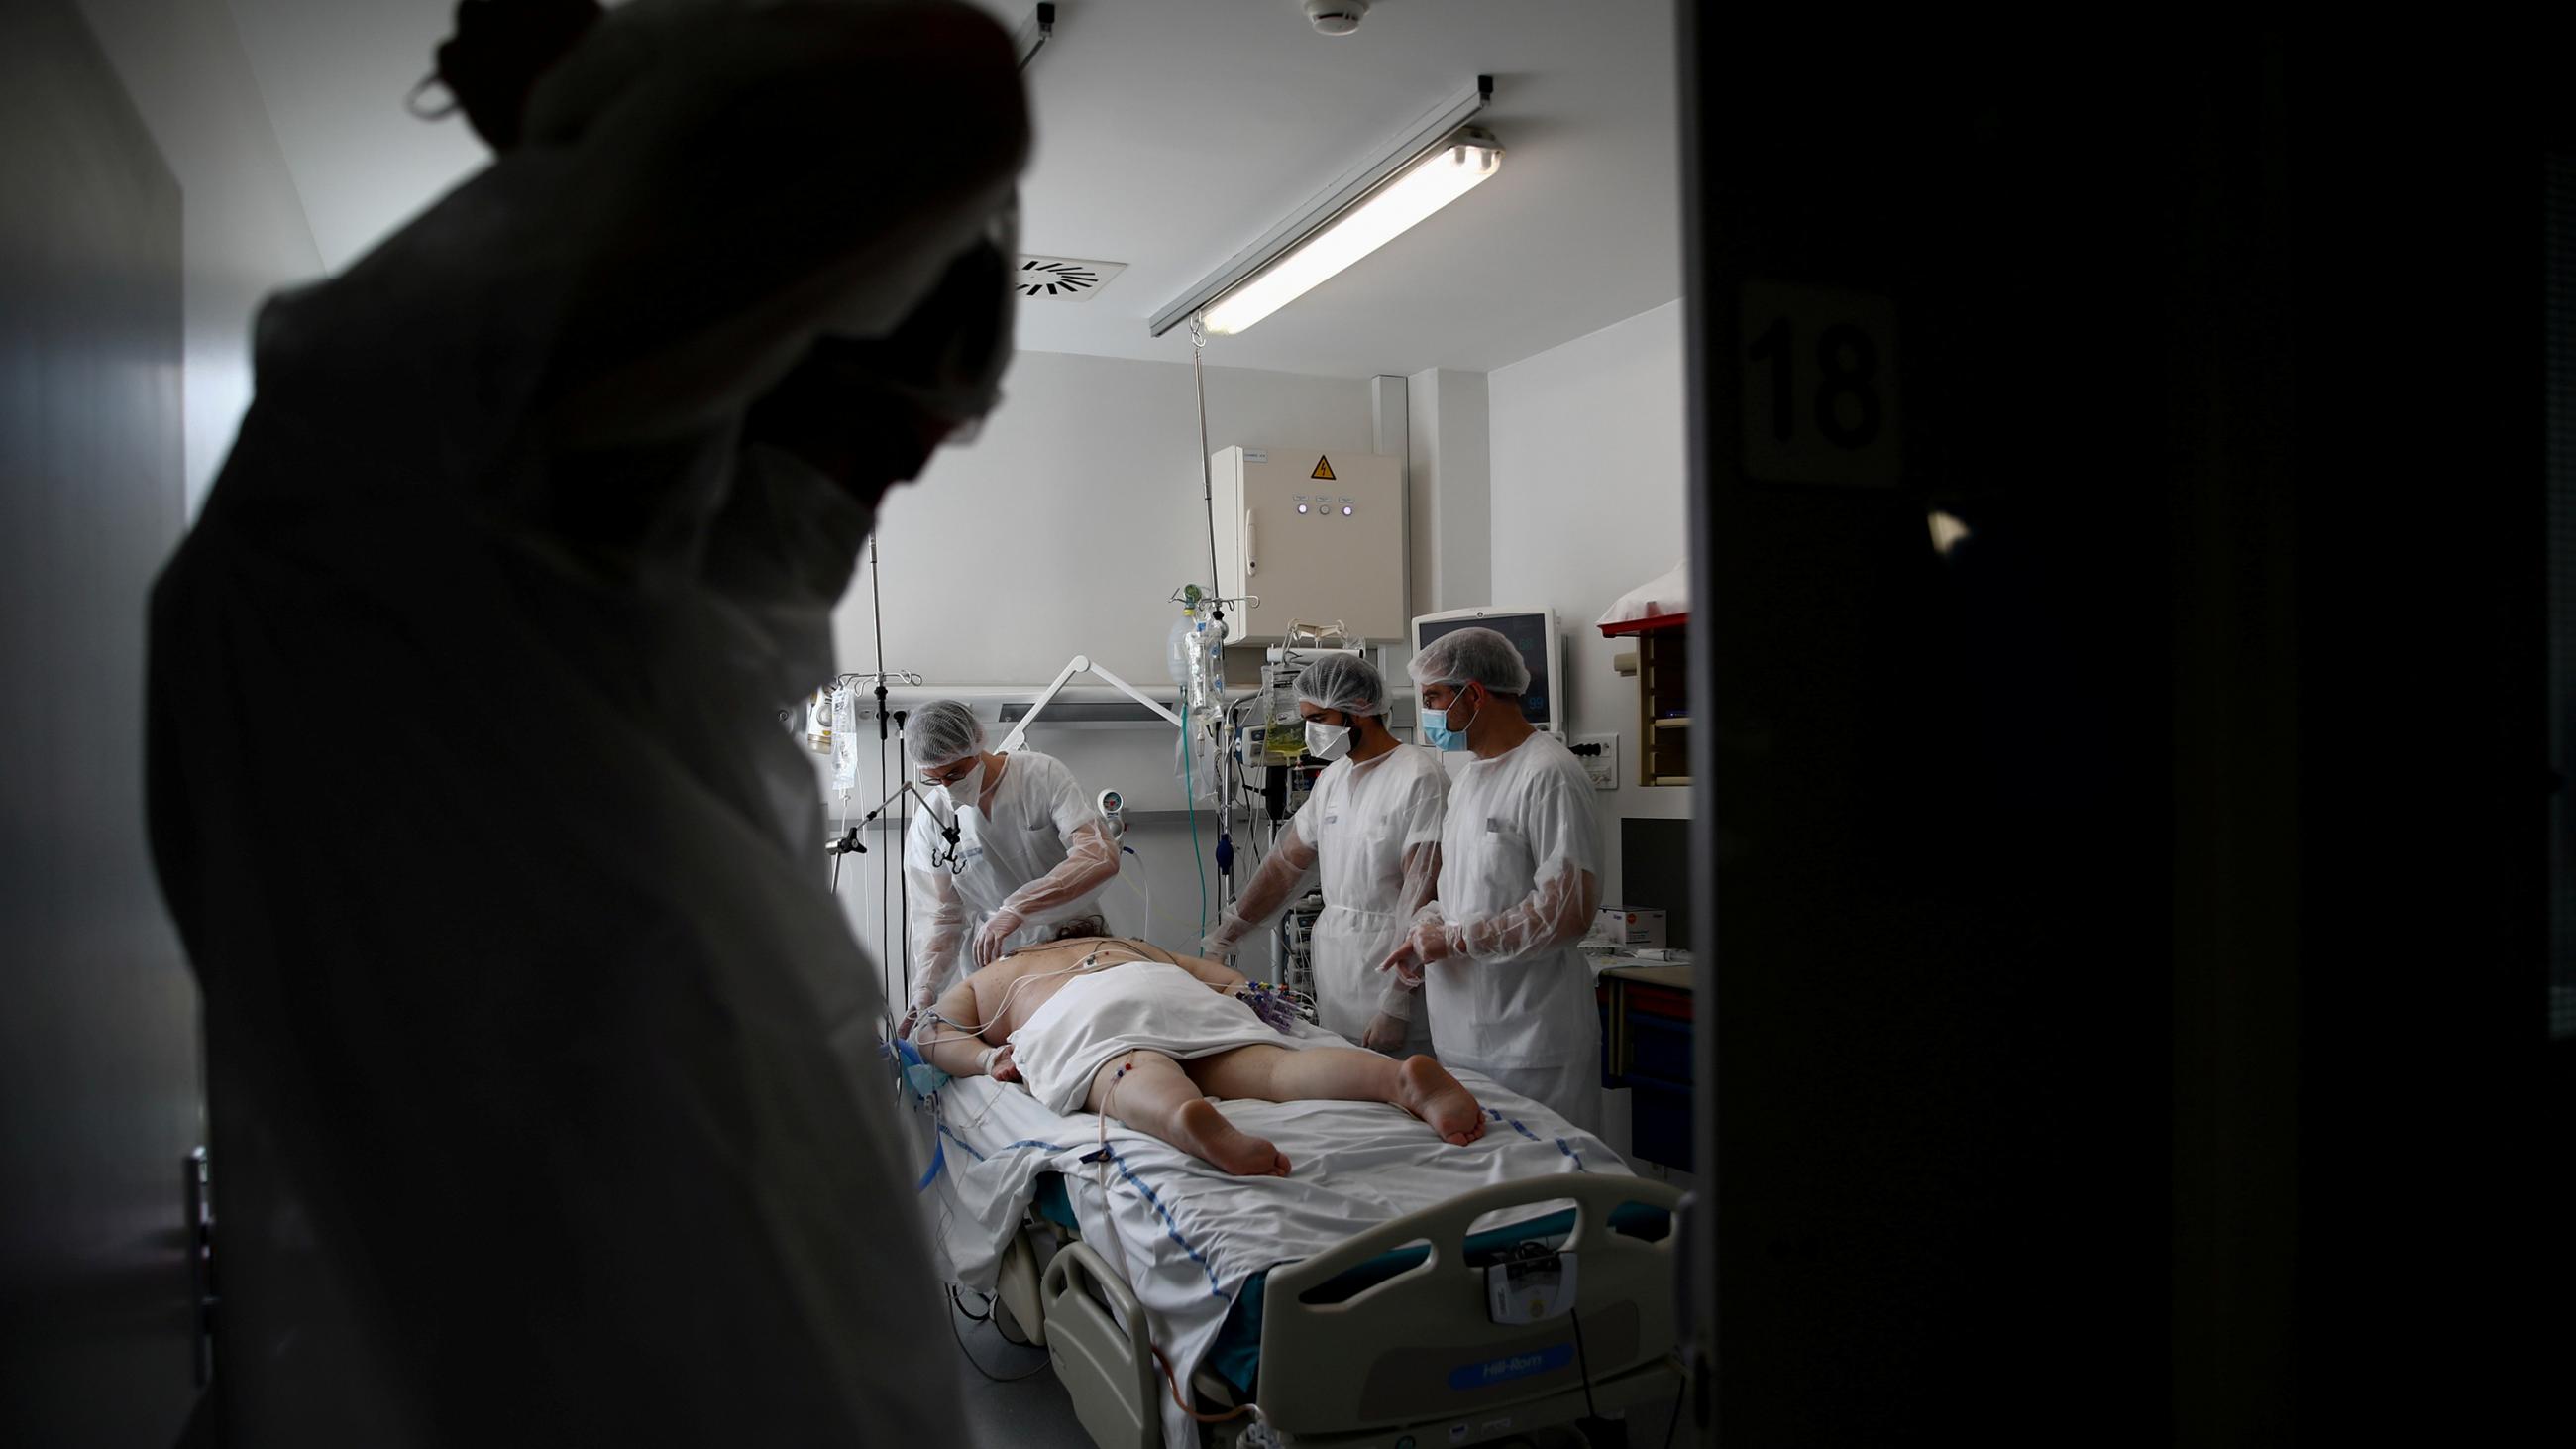 The photo shows a team of medical workers attending to the patient. 